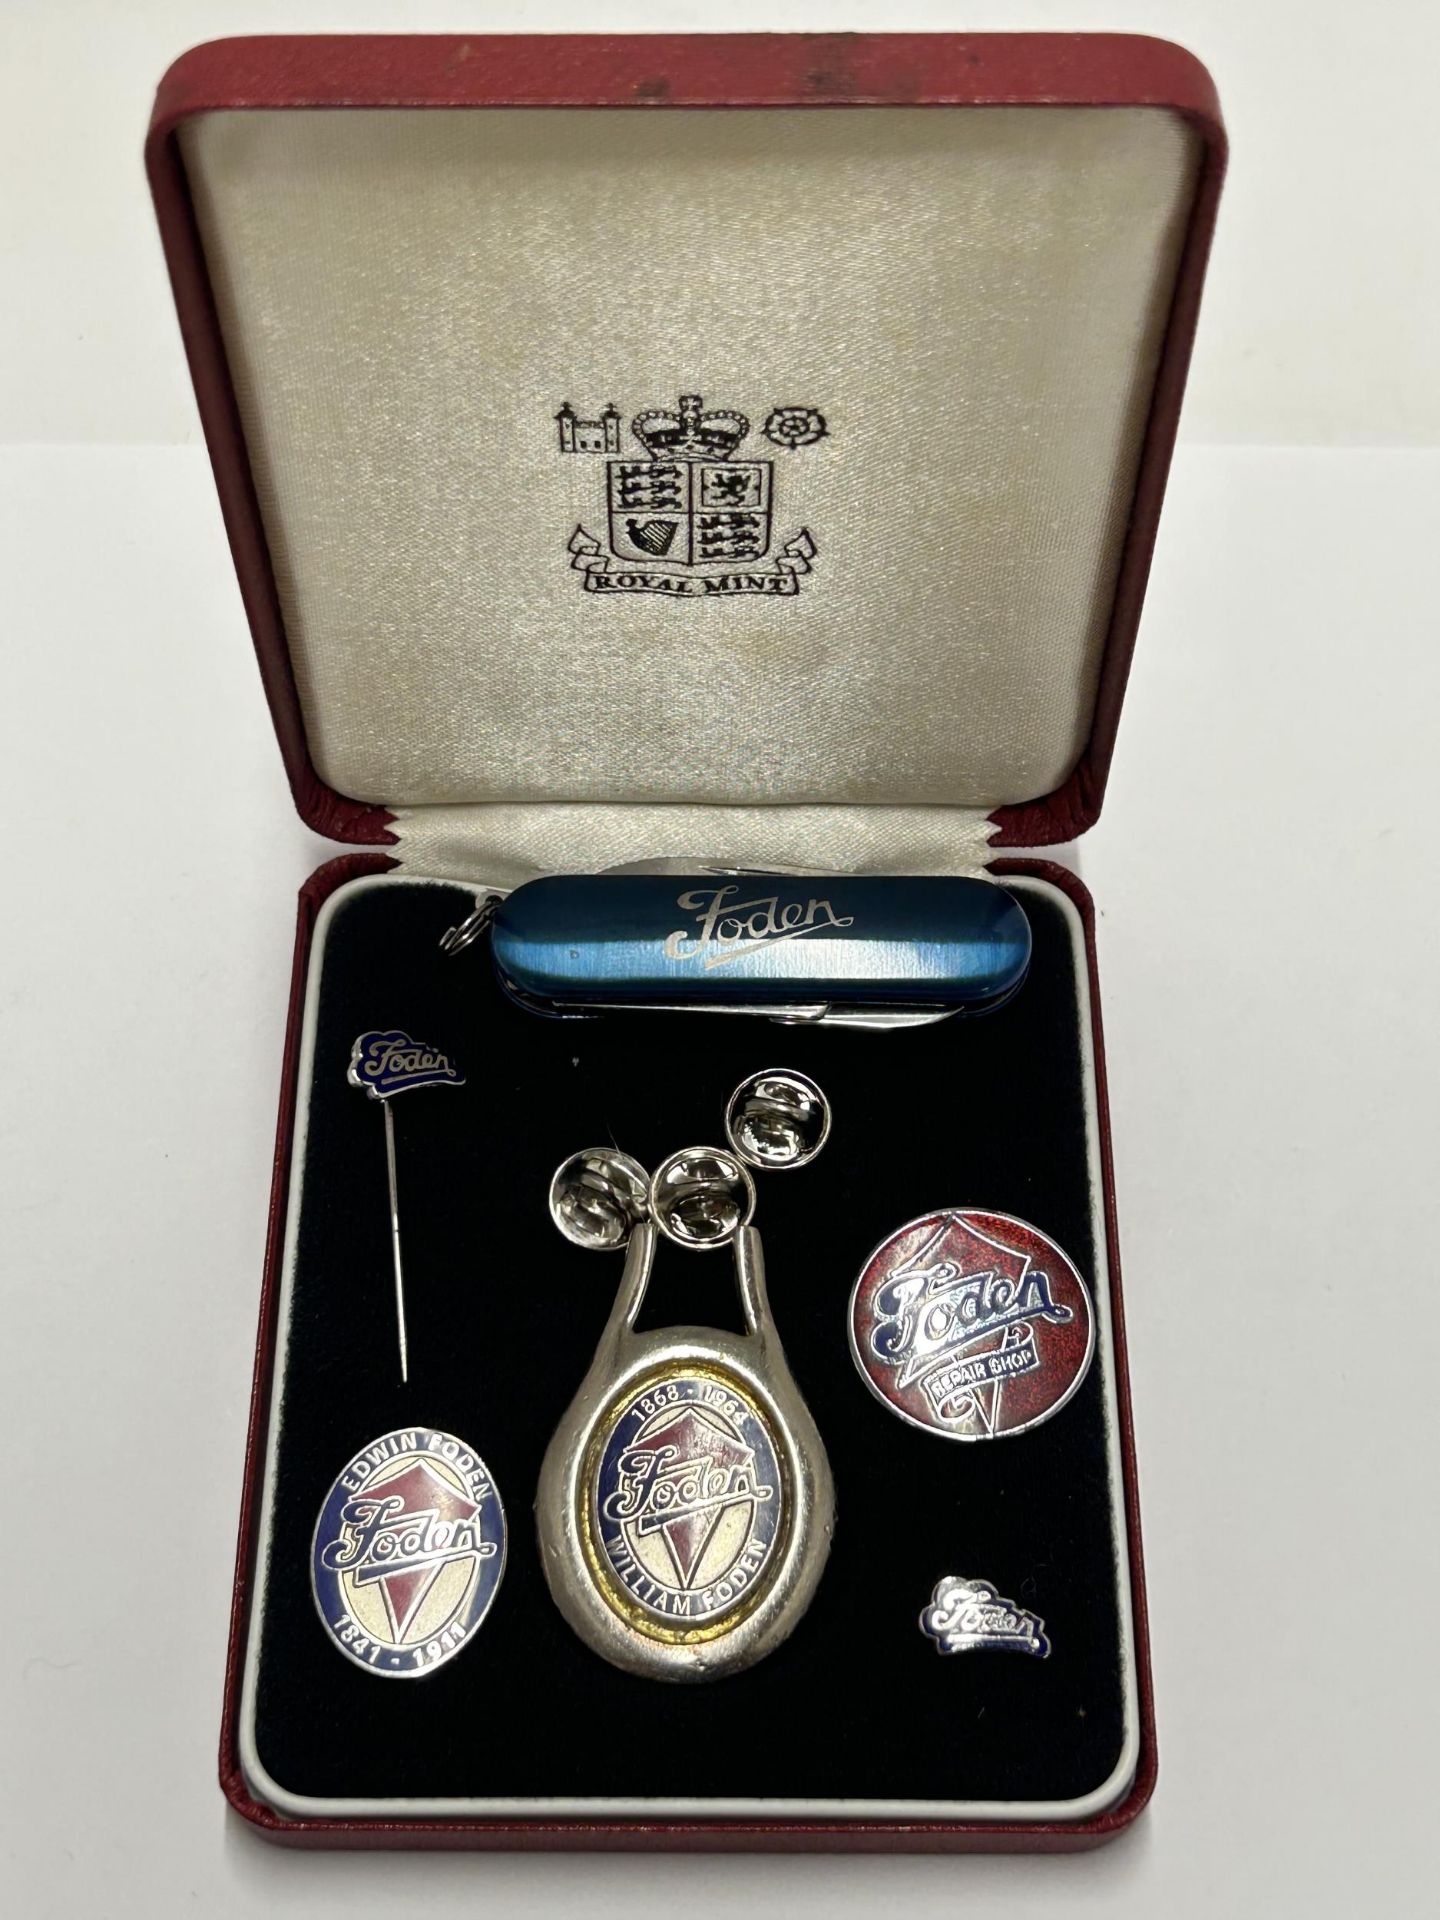 A COLLECTION OF VINTAGE ORIGINAL PRESENTATION FODEN ITEMS COMMISSIONED BY ROYAL MINT TO INCLUDE FOUR